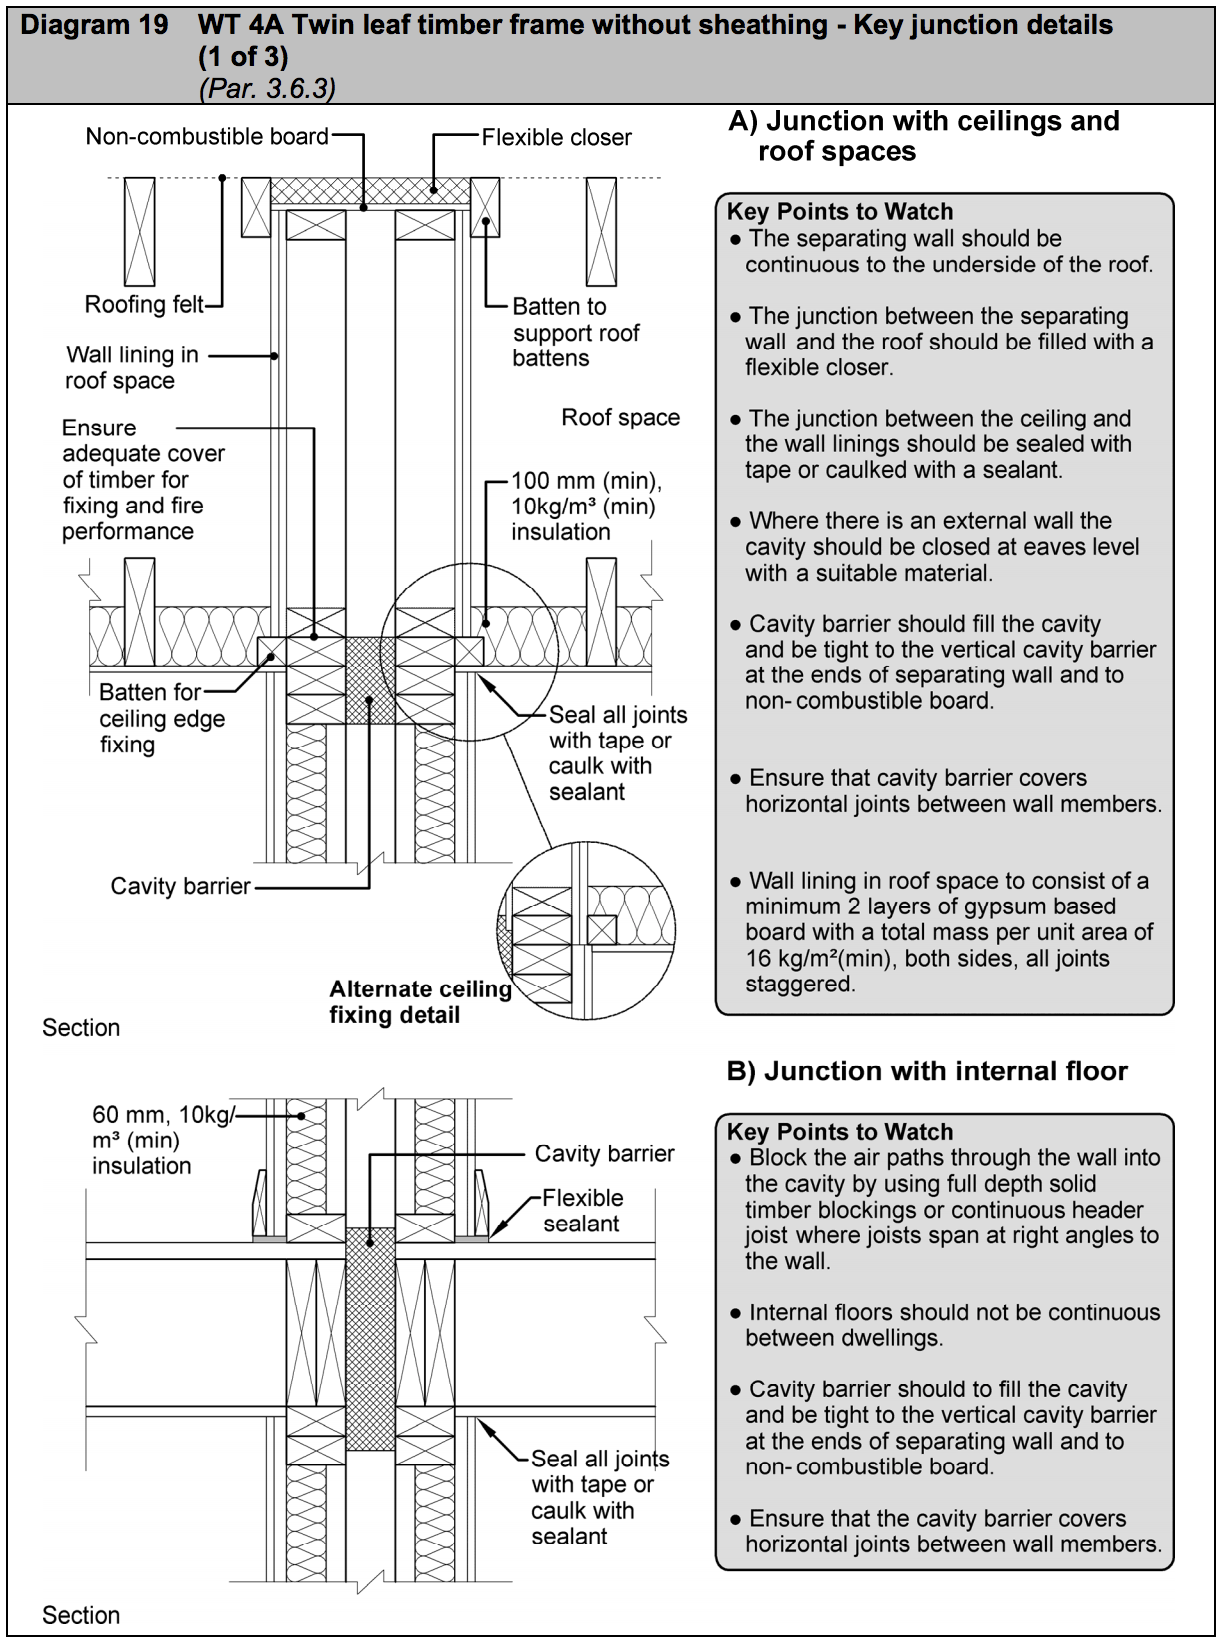 Diagram HE19 - WT 4A Twin leaf timber frame without sheathing - key junction details (1 of 3) - Extract from TGD E